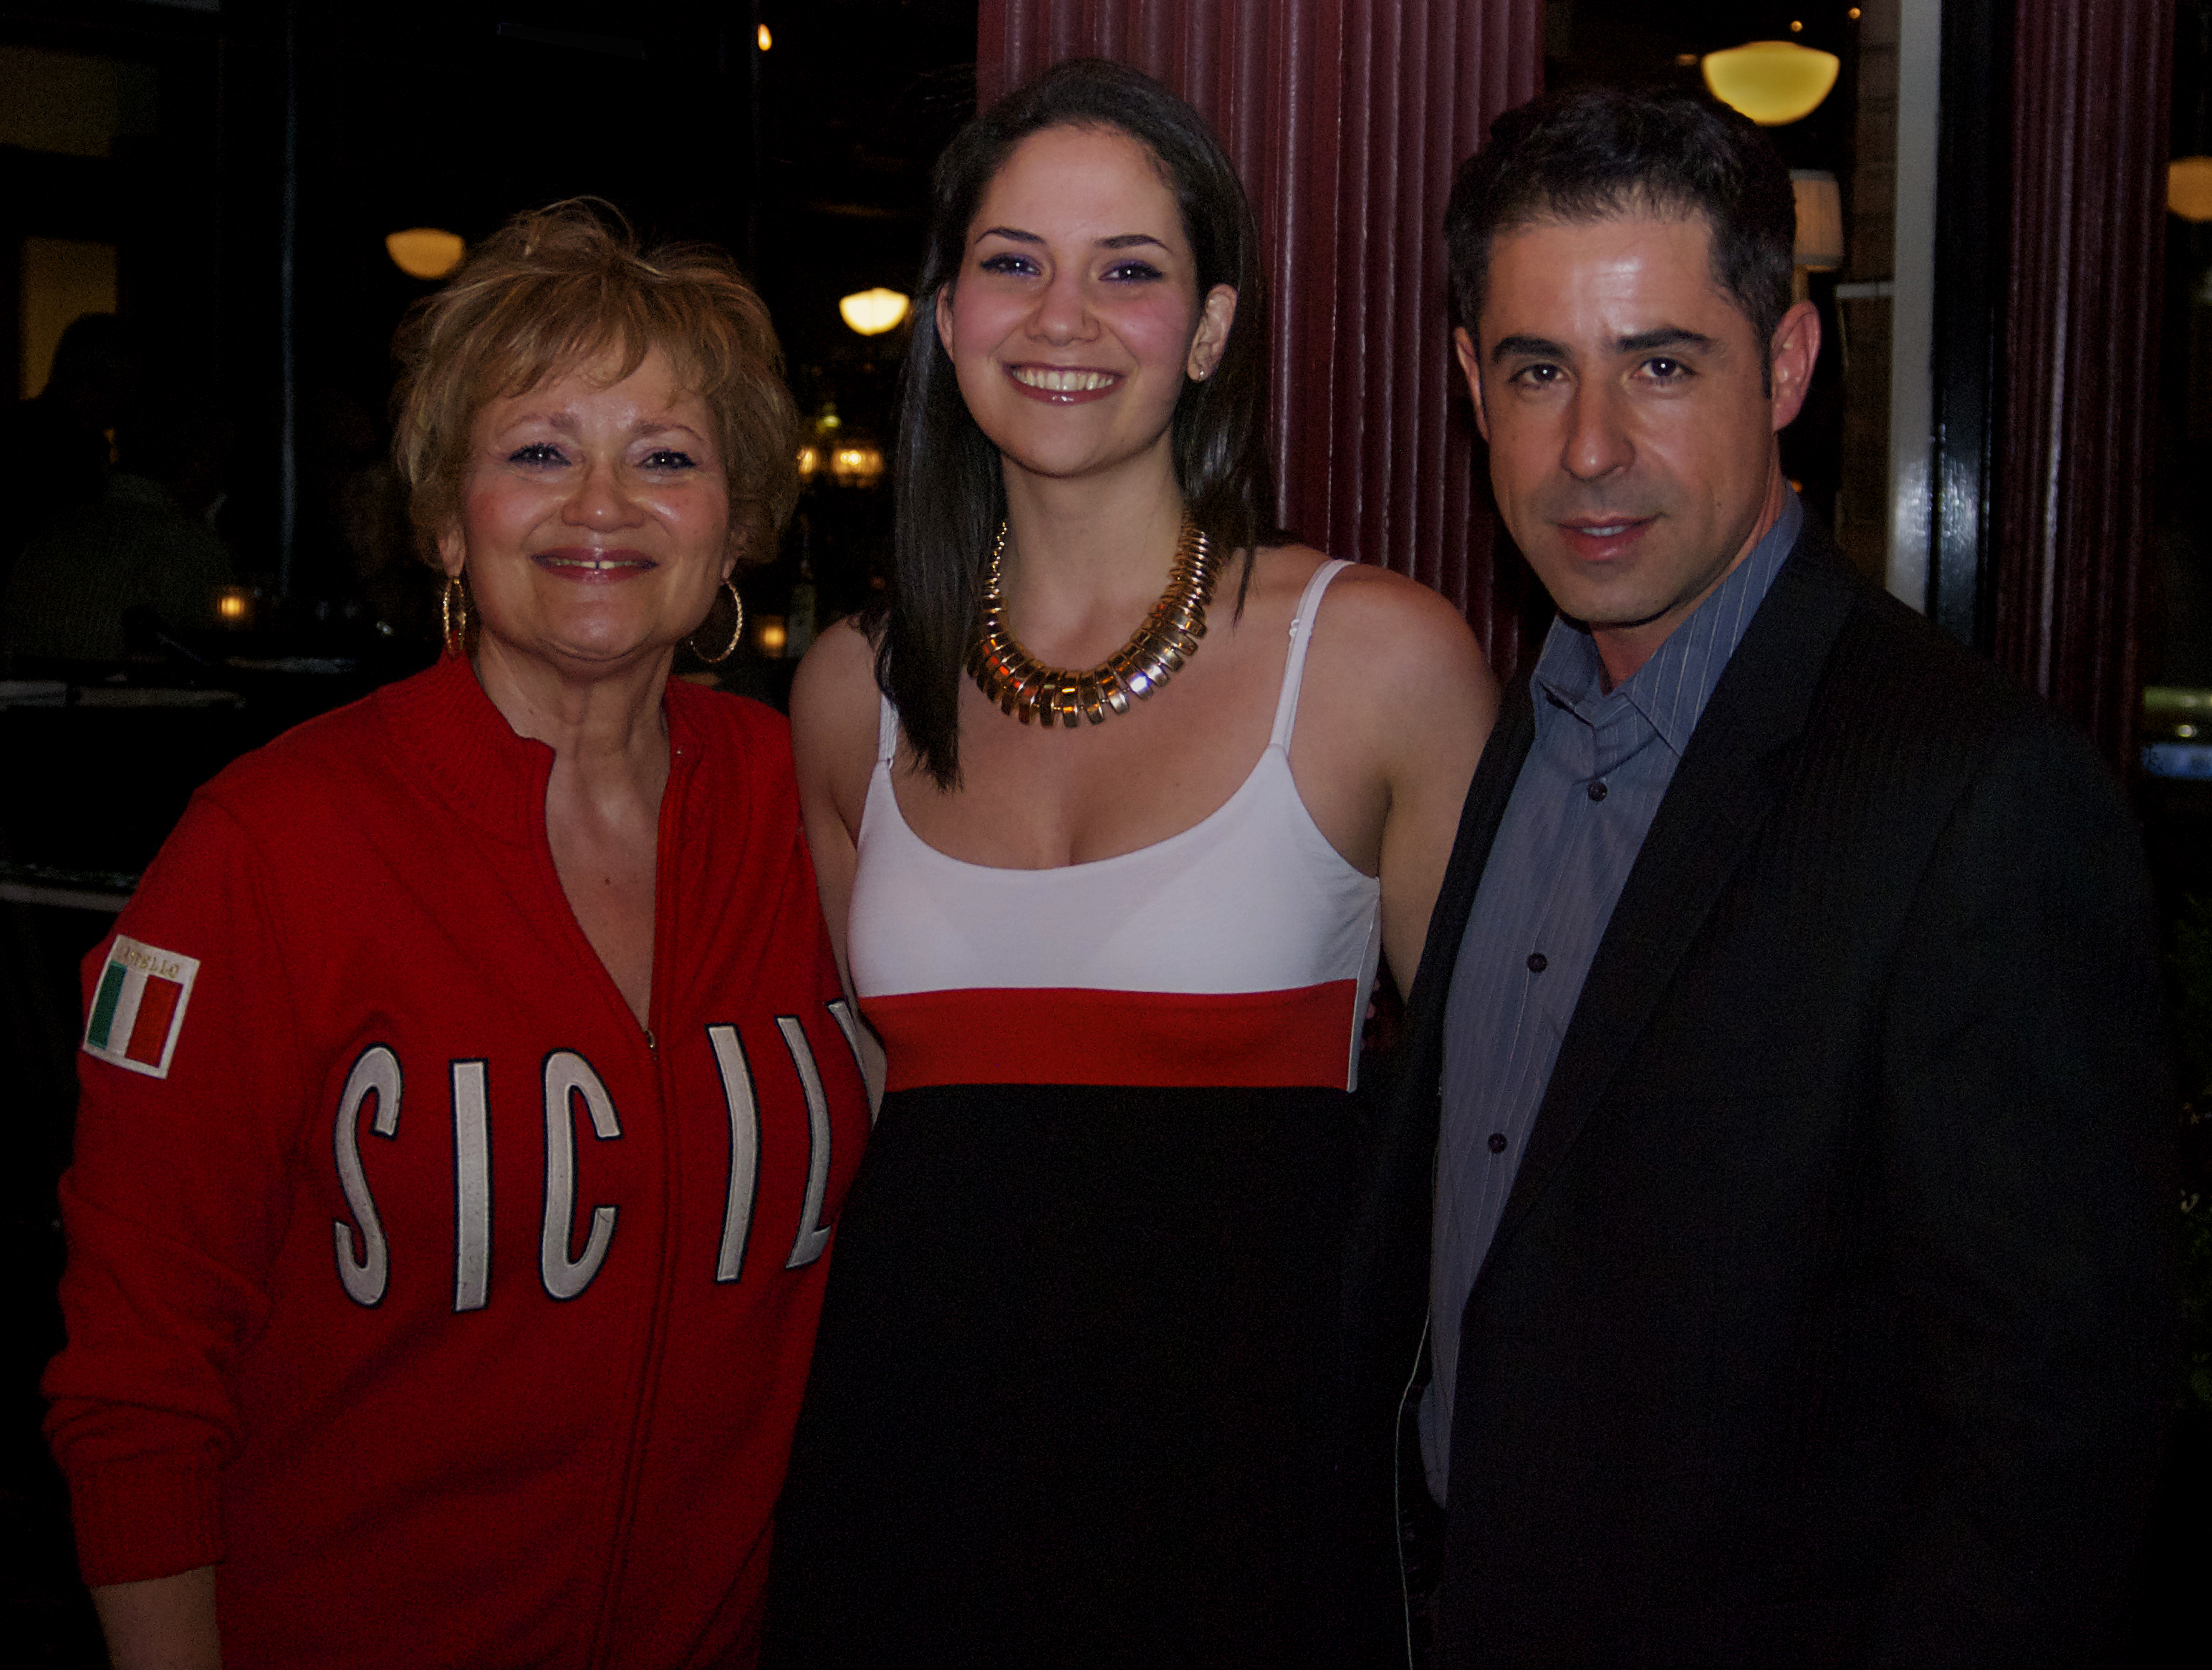 A SICILIAN ODYSSEY Director Jenna Maria Constantine with stars in A SICILIAN ODYSSEY, Evyenia Constantine (Nikki Barry) and Graziano Pinna (Archimedes) at the 